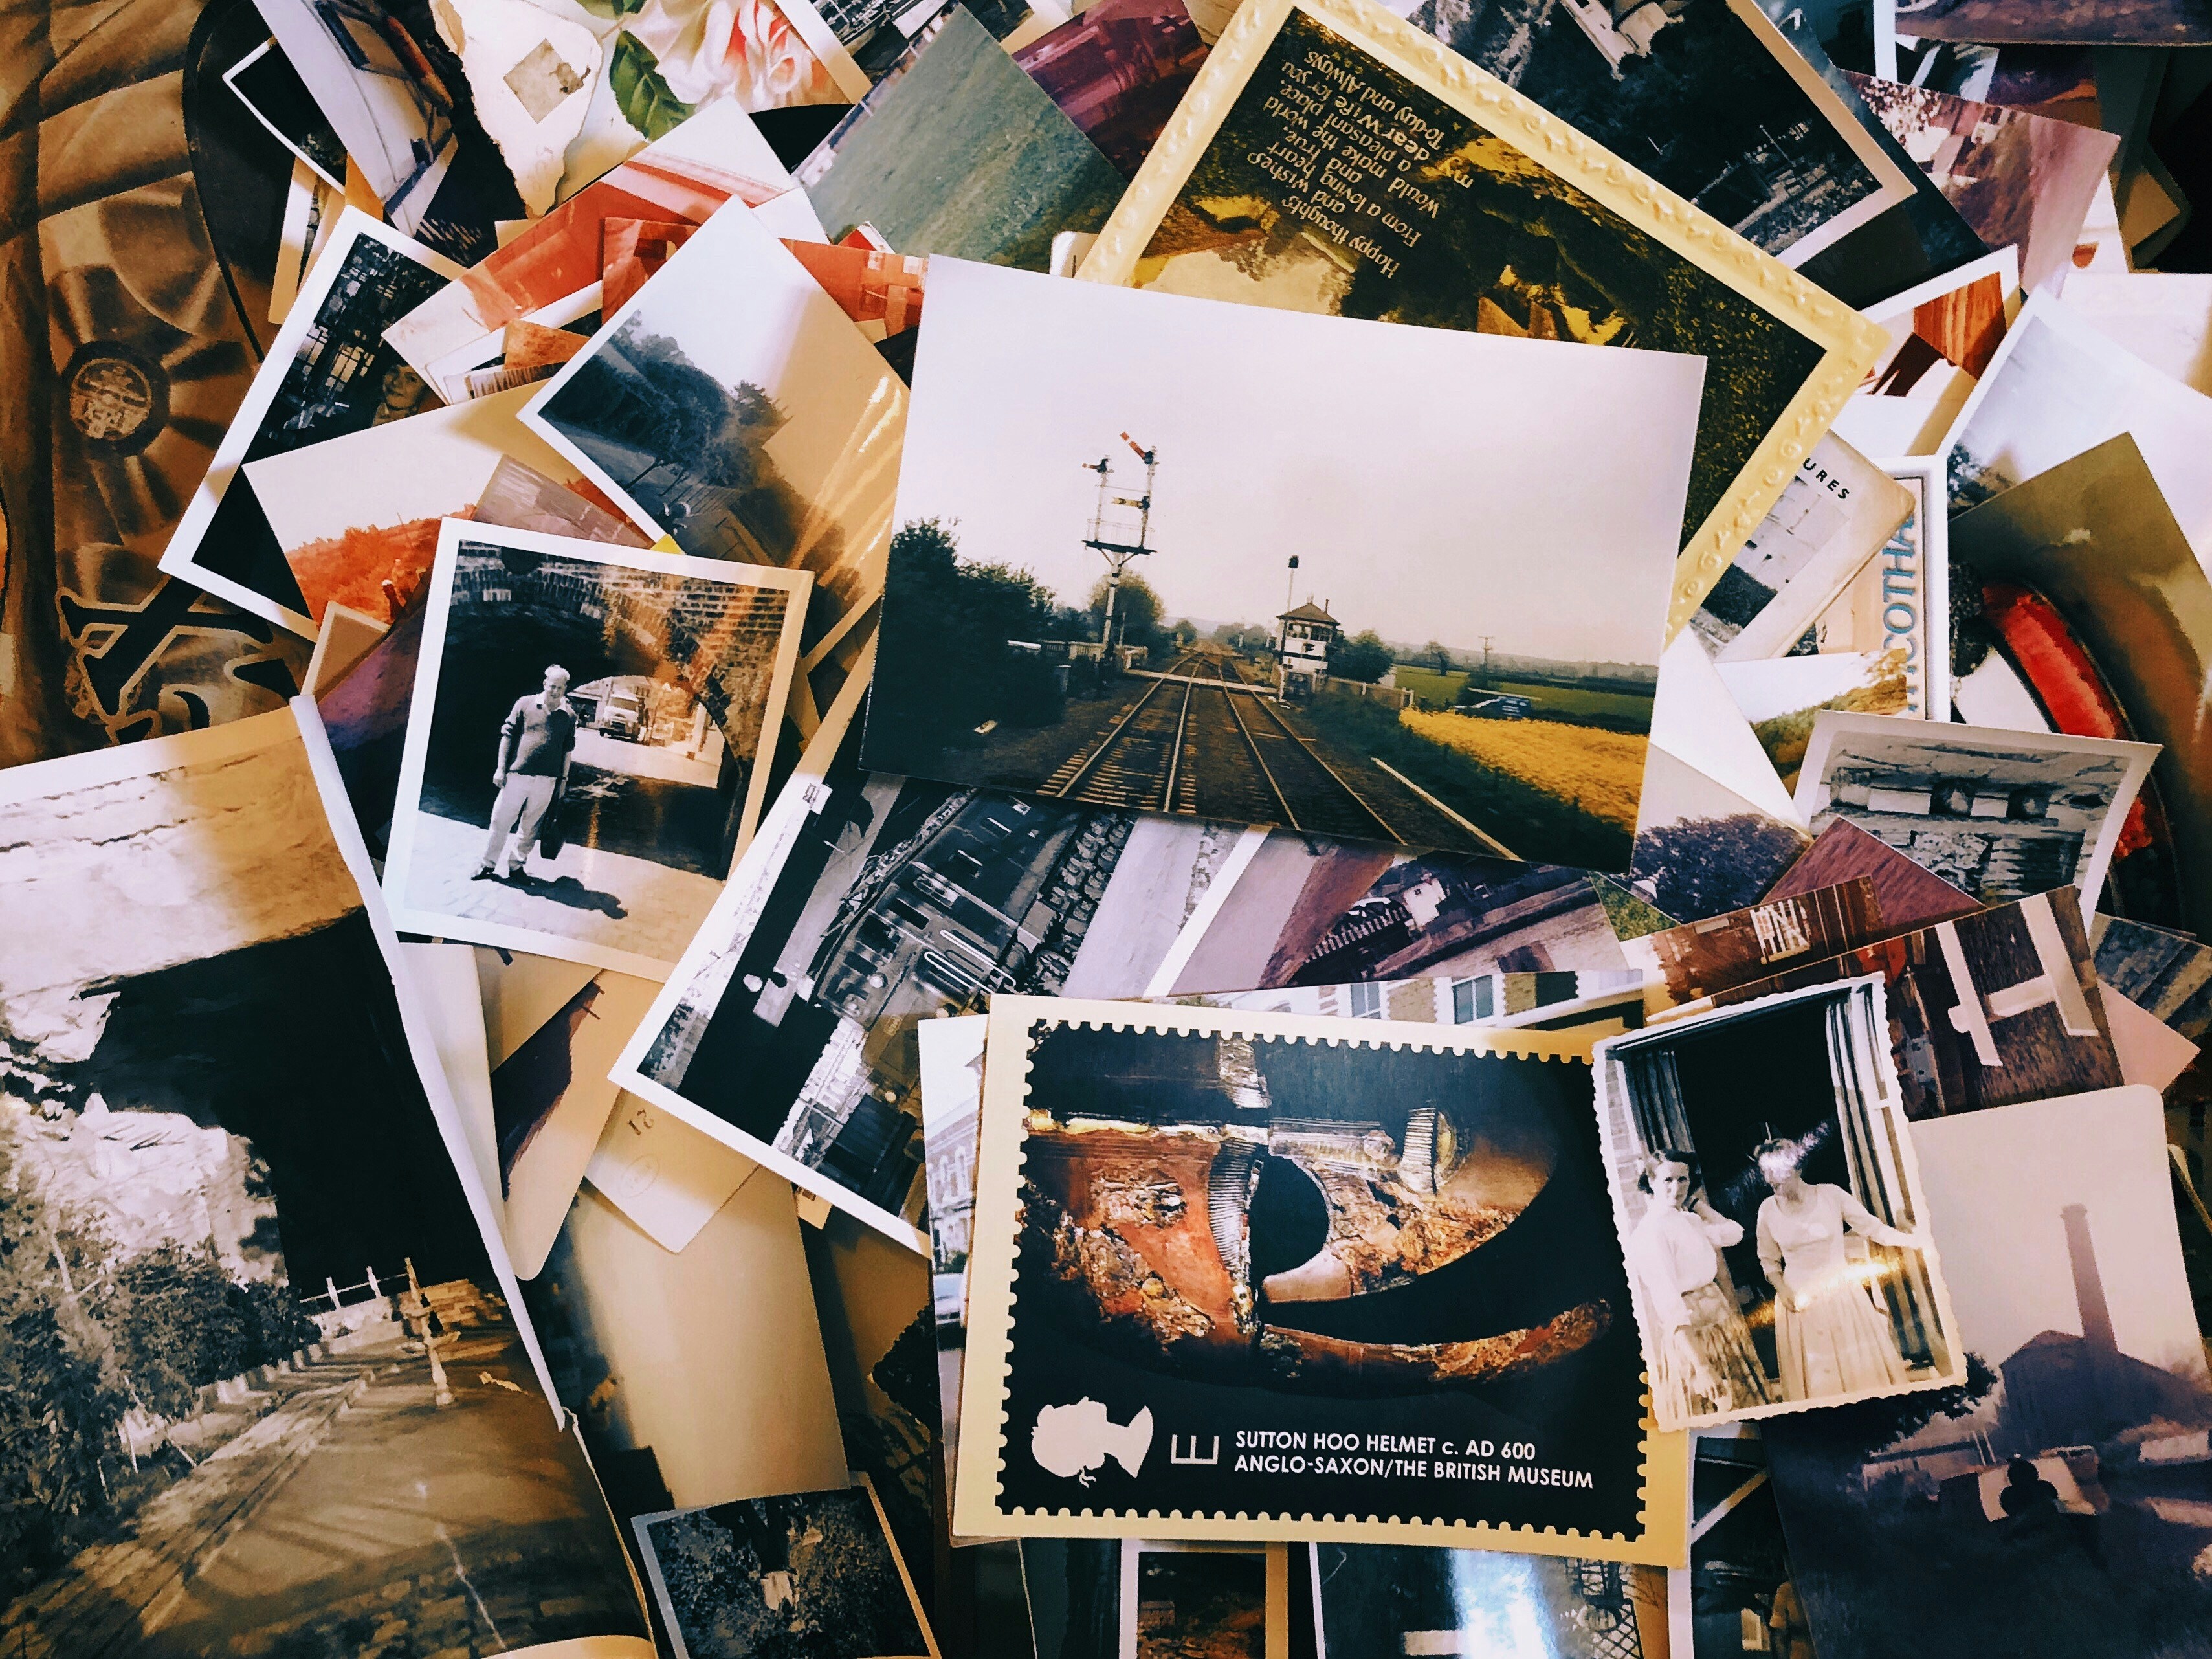 Pictures and postcards piled on each other; image by Jon Tyson, via Unsplash.com.